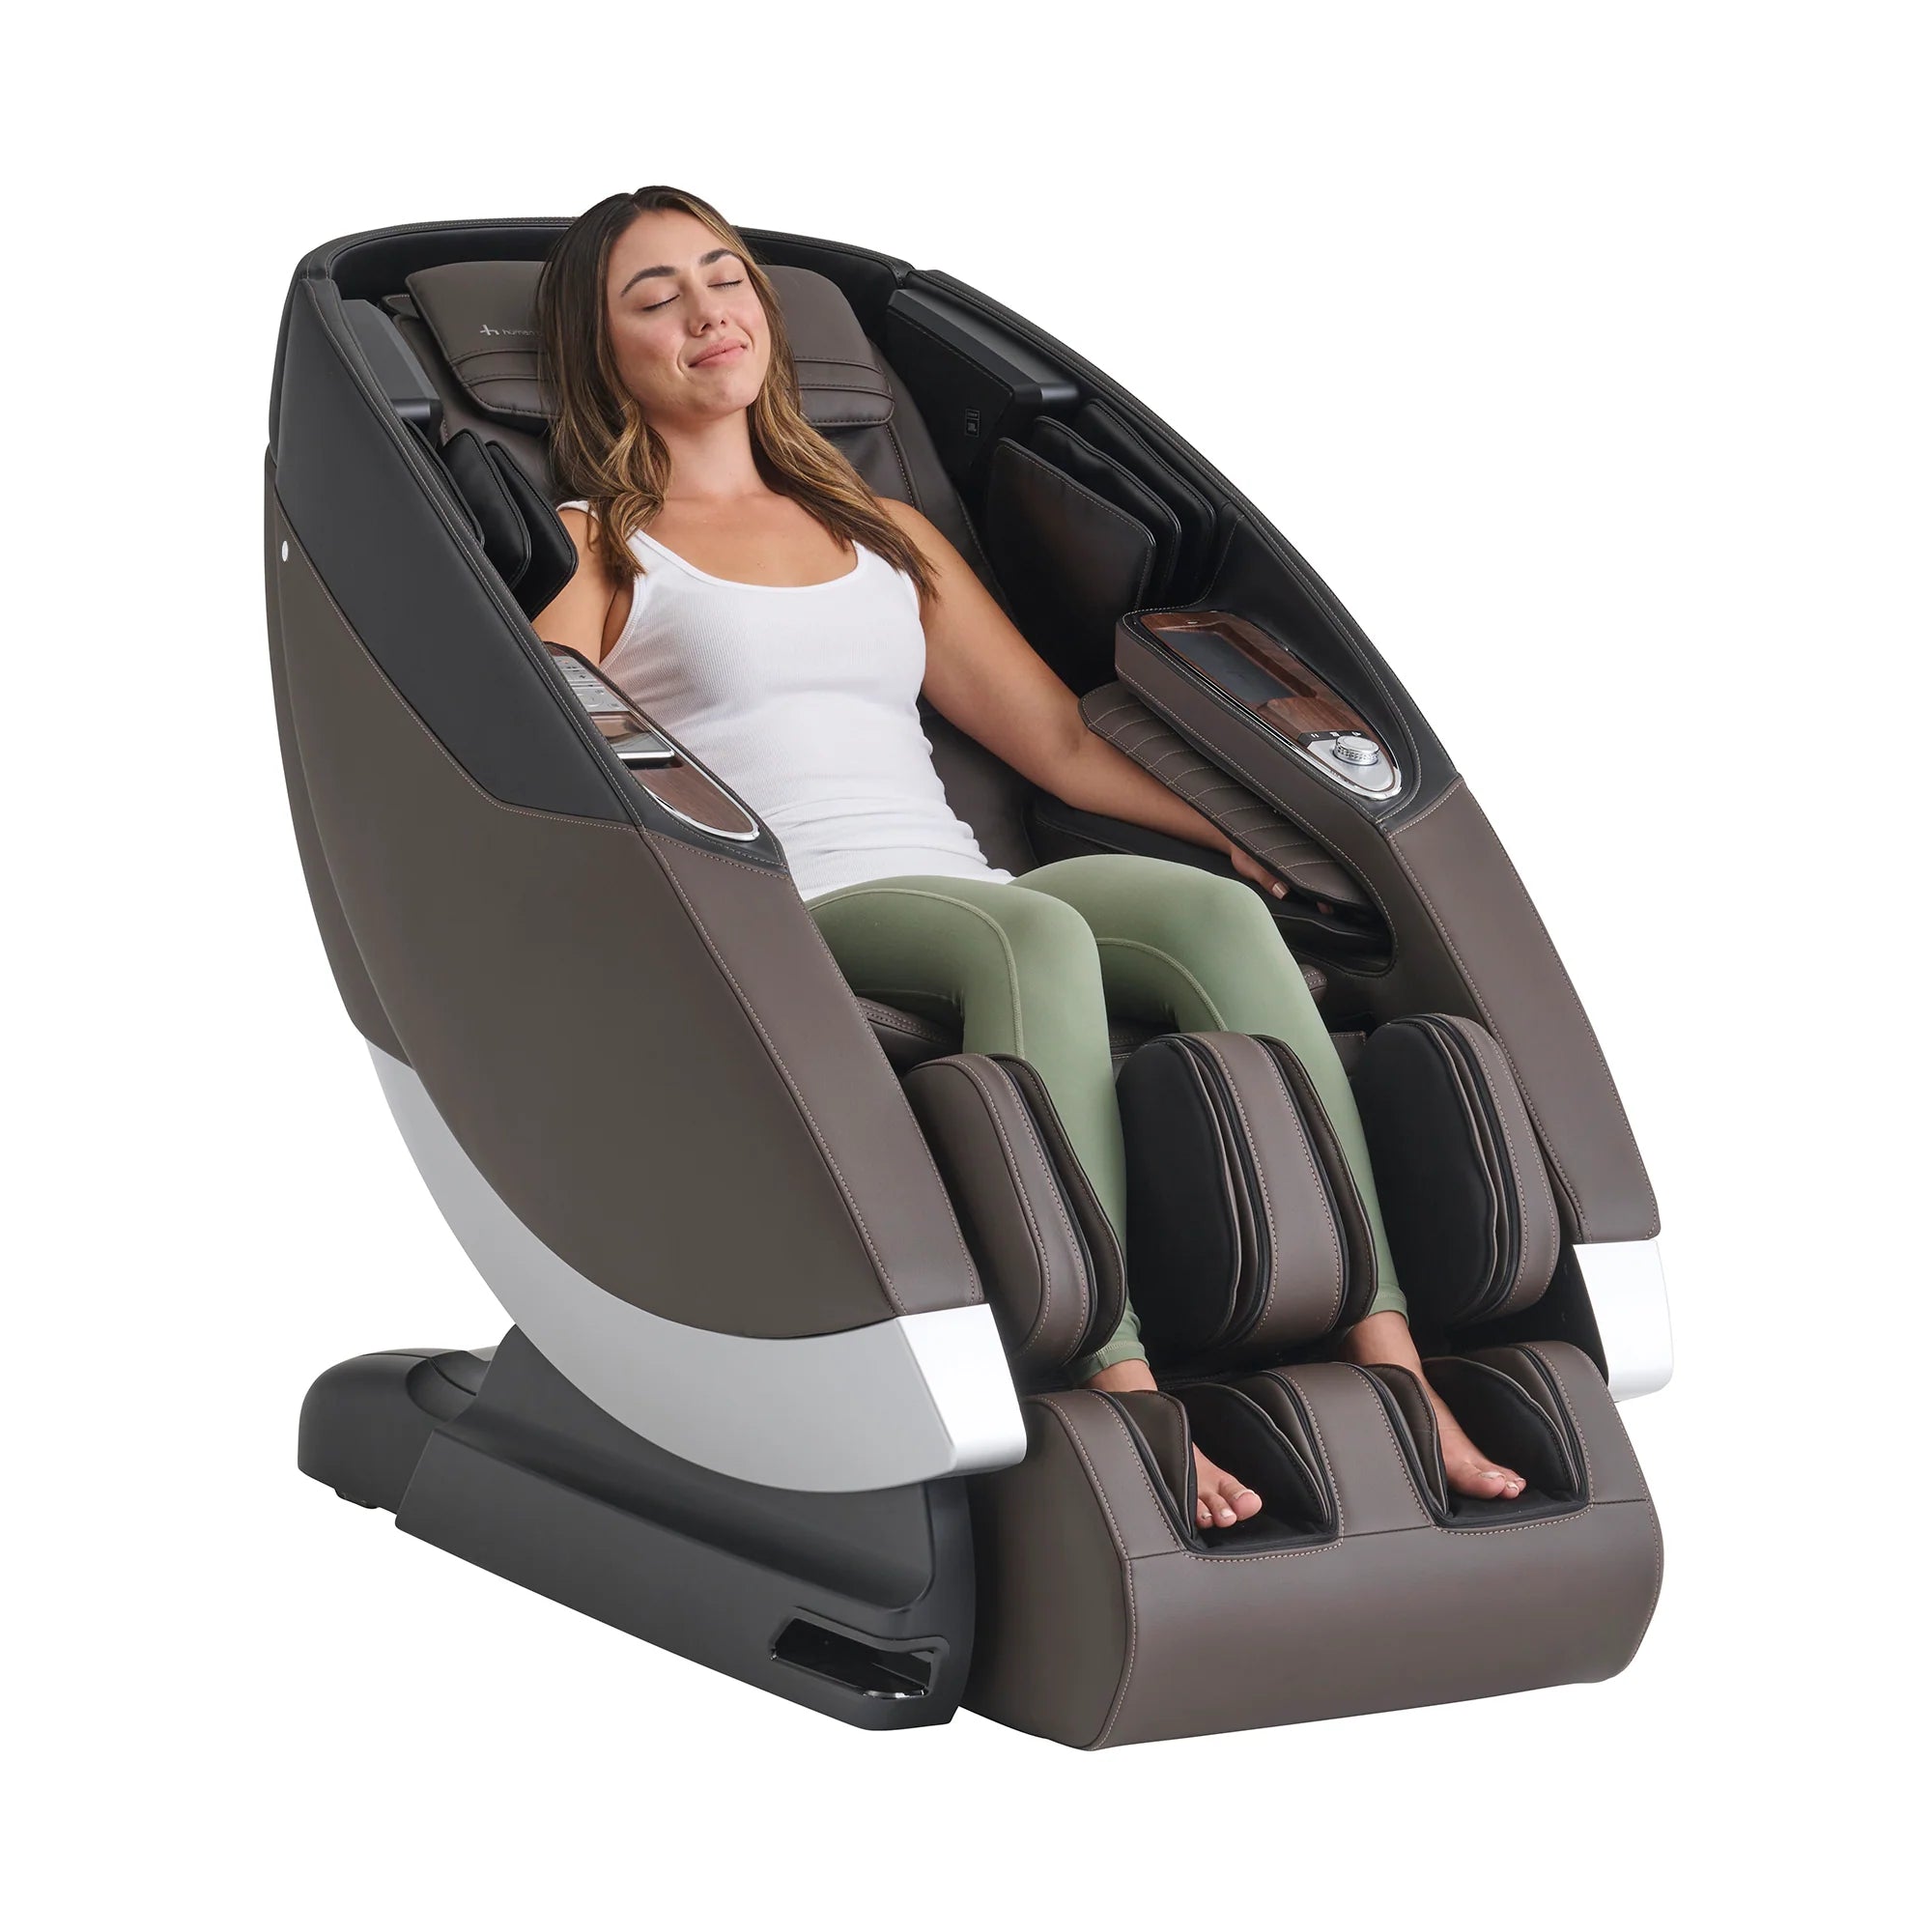 Human TouchMassage ChairsHuman Touch Super Novo 2.0 Massage ChairEspressoMassage Chair Heaven